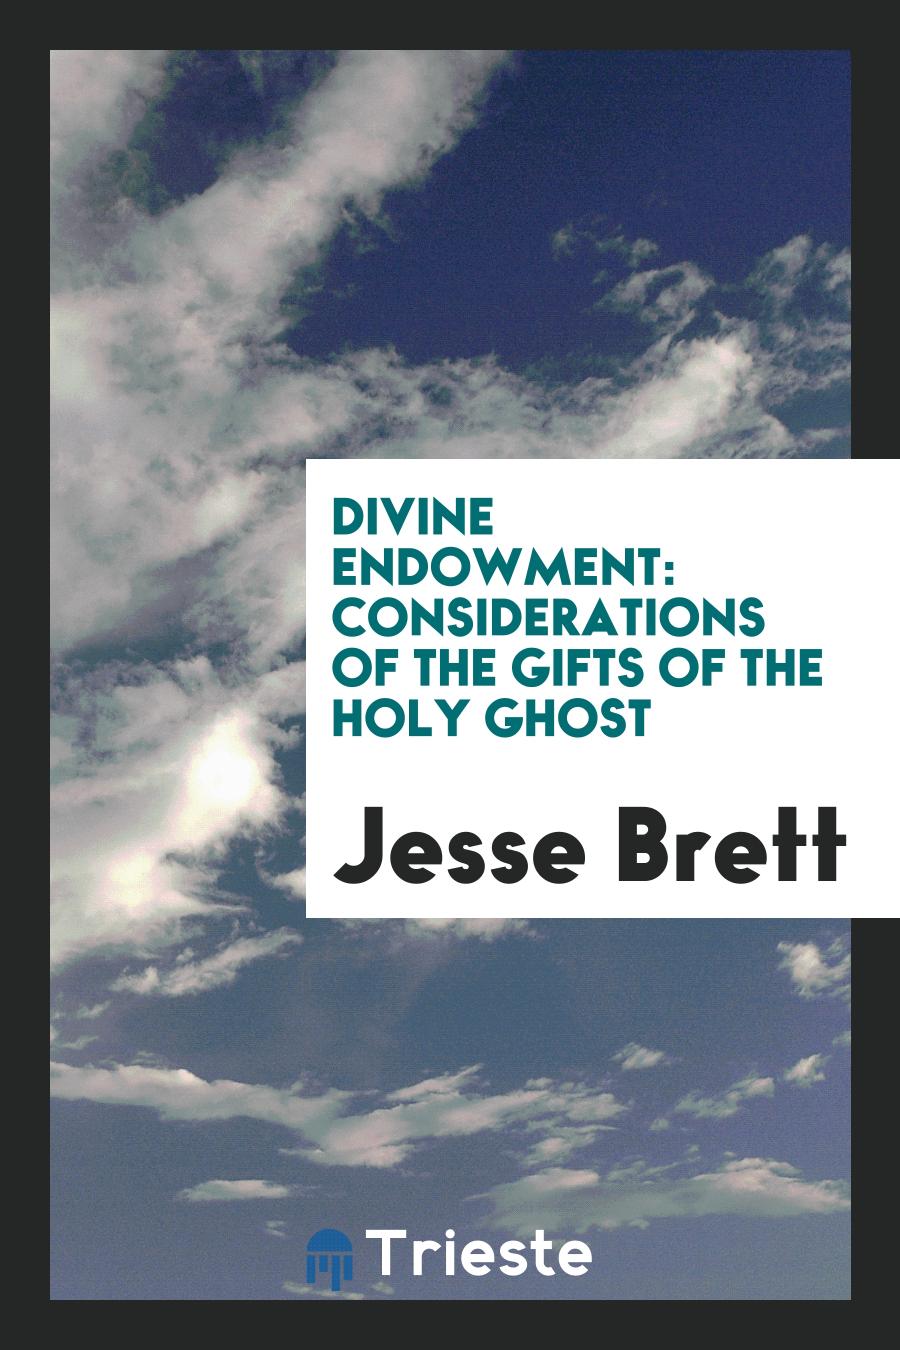 Divine Endowment: Considerations of the Gifts of the Holy Ghost